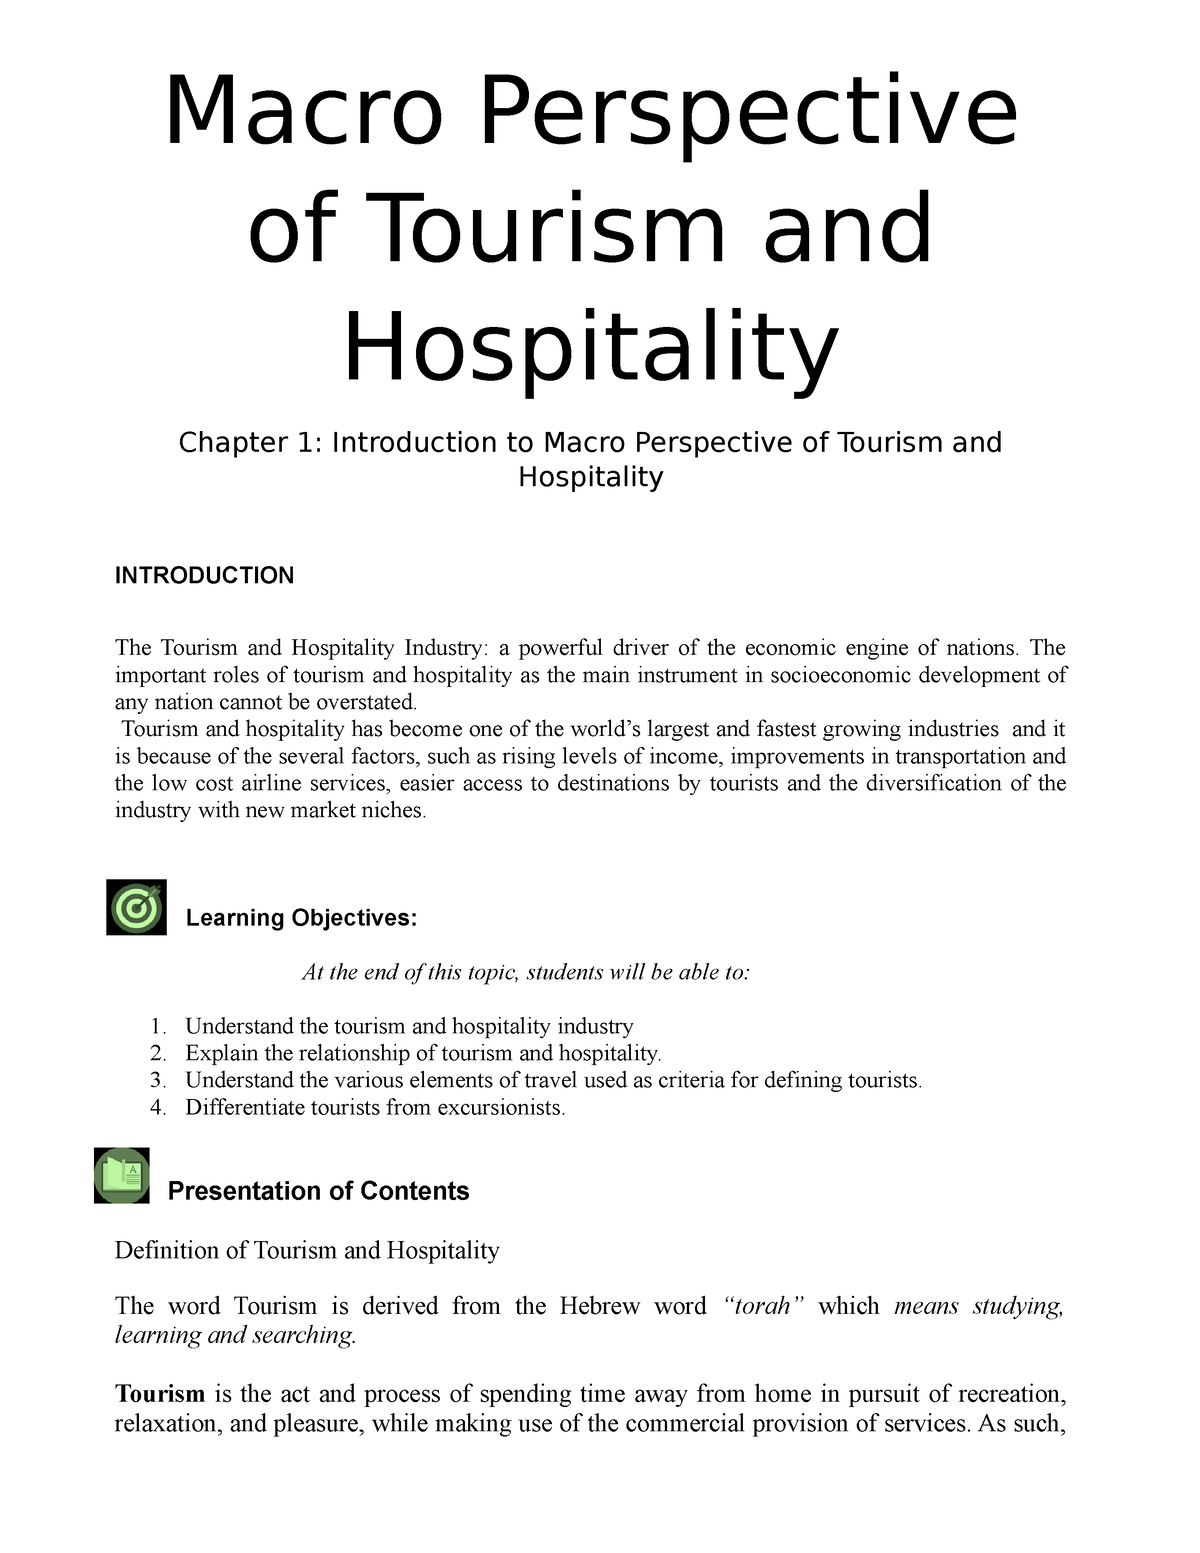 Introduction to Tourism (Macroperspective in Tourism and Hospitality)